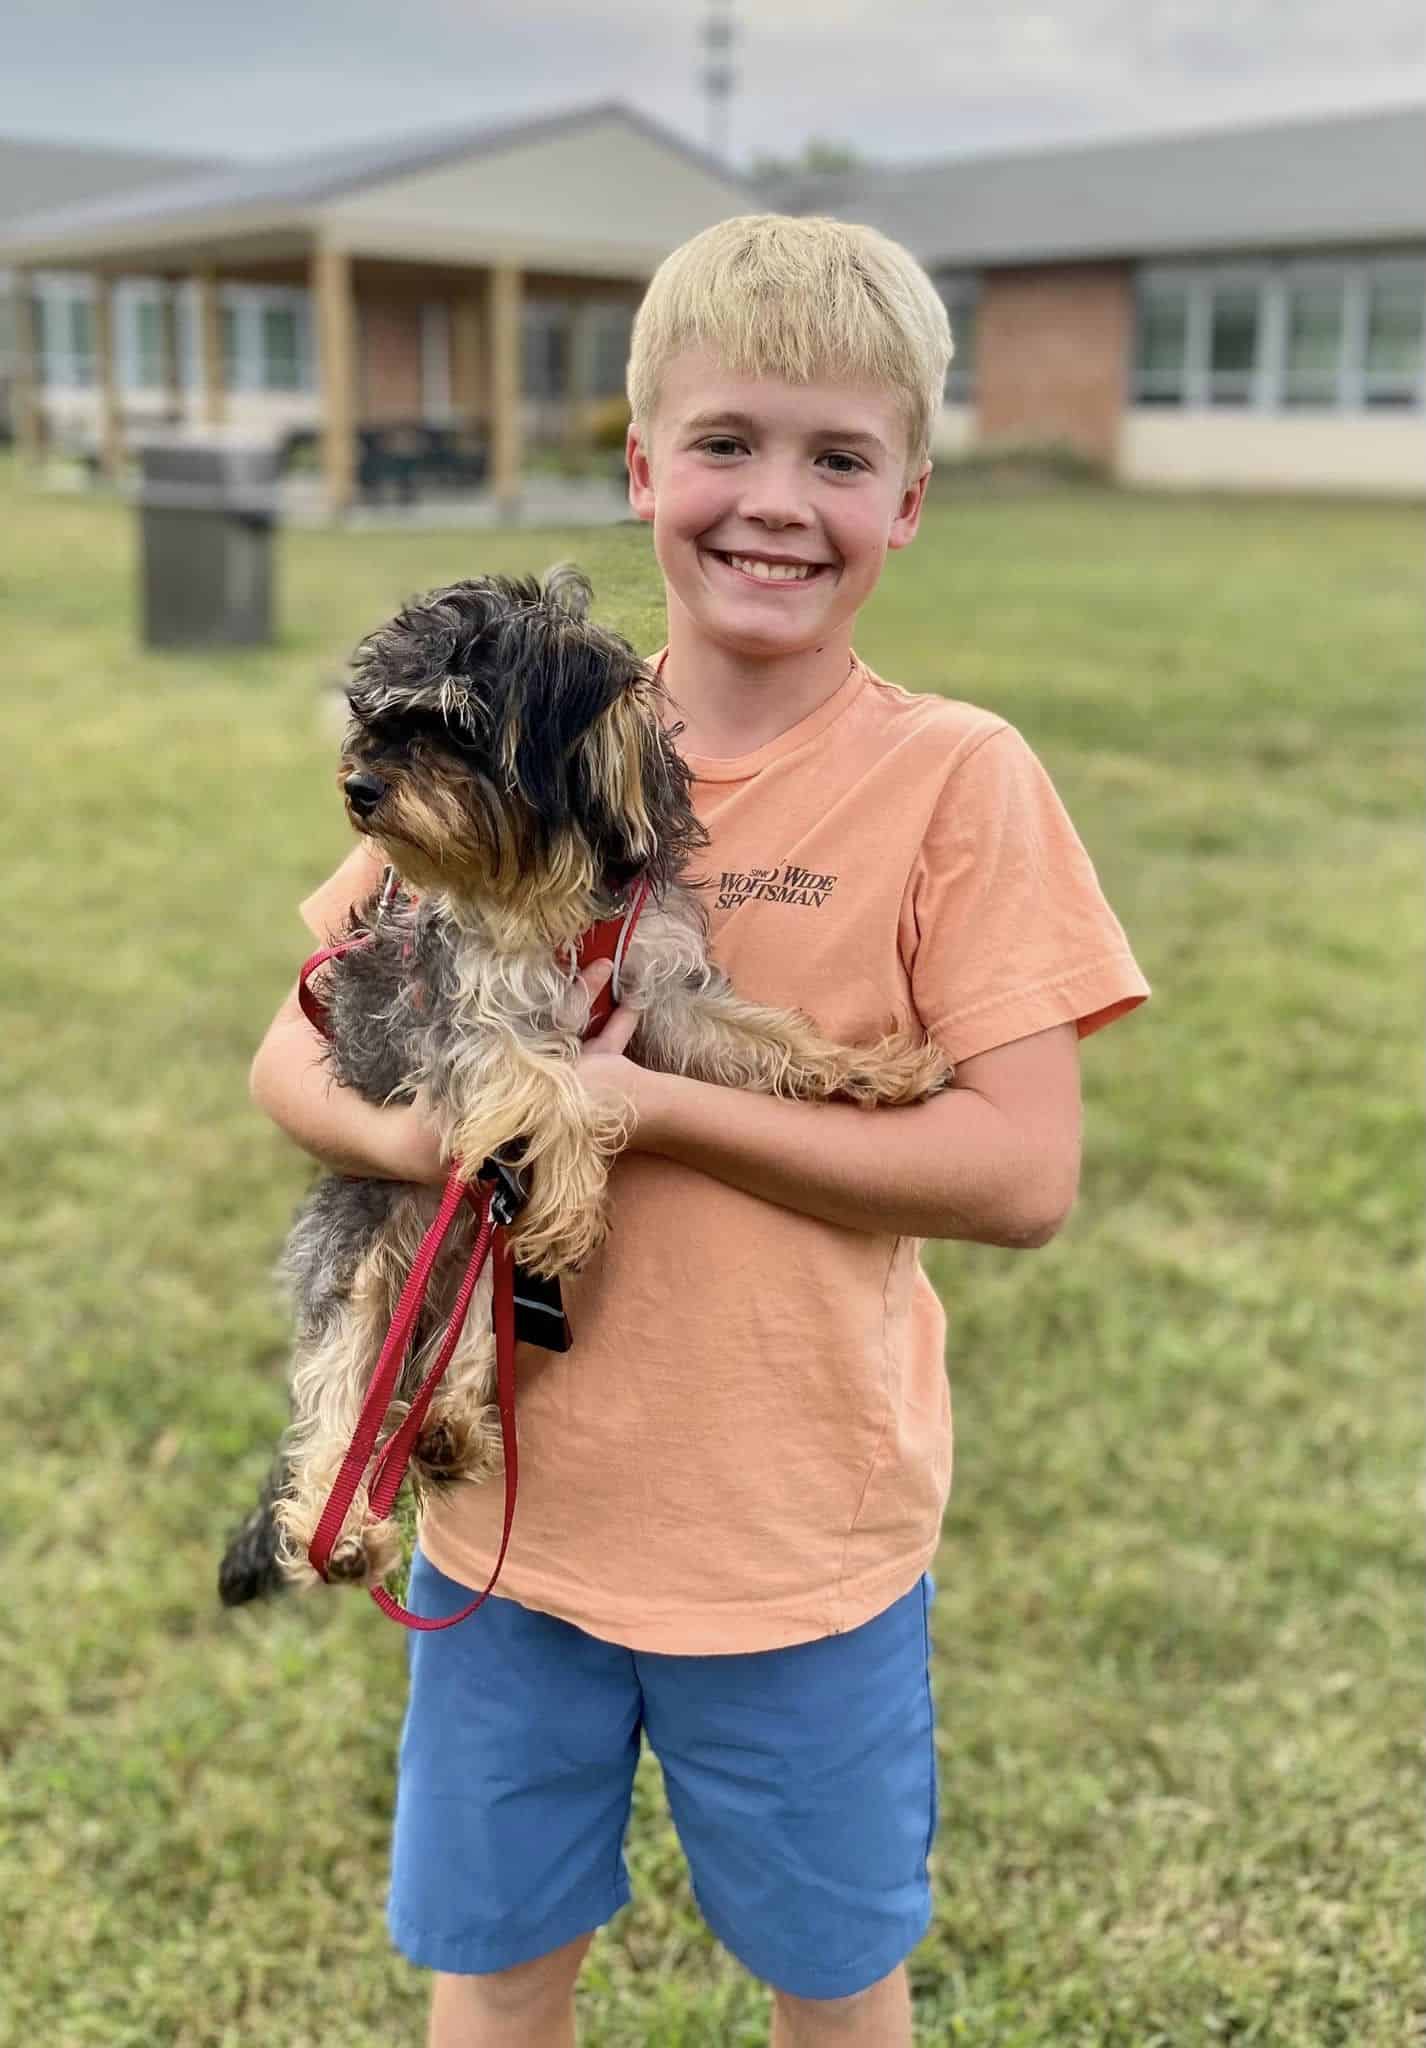 A young boy holding a small dog in front of a building.